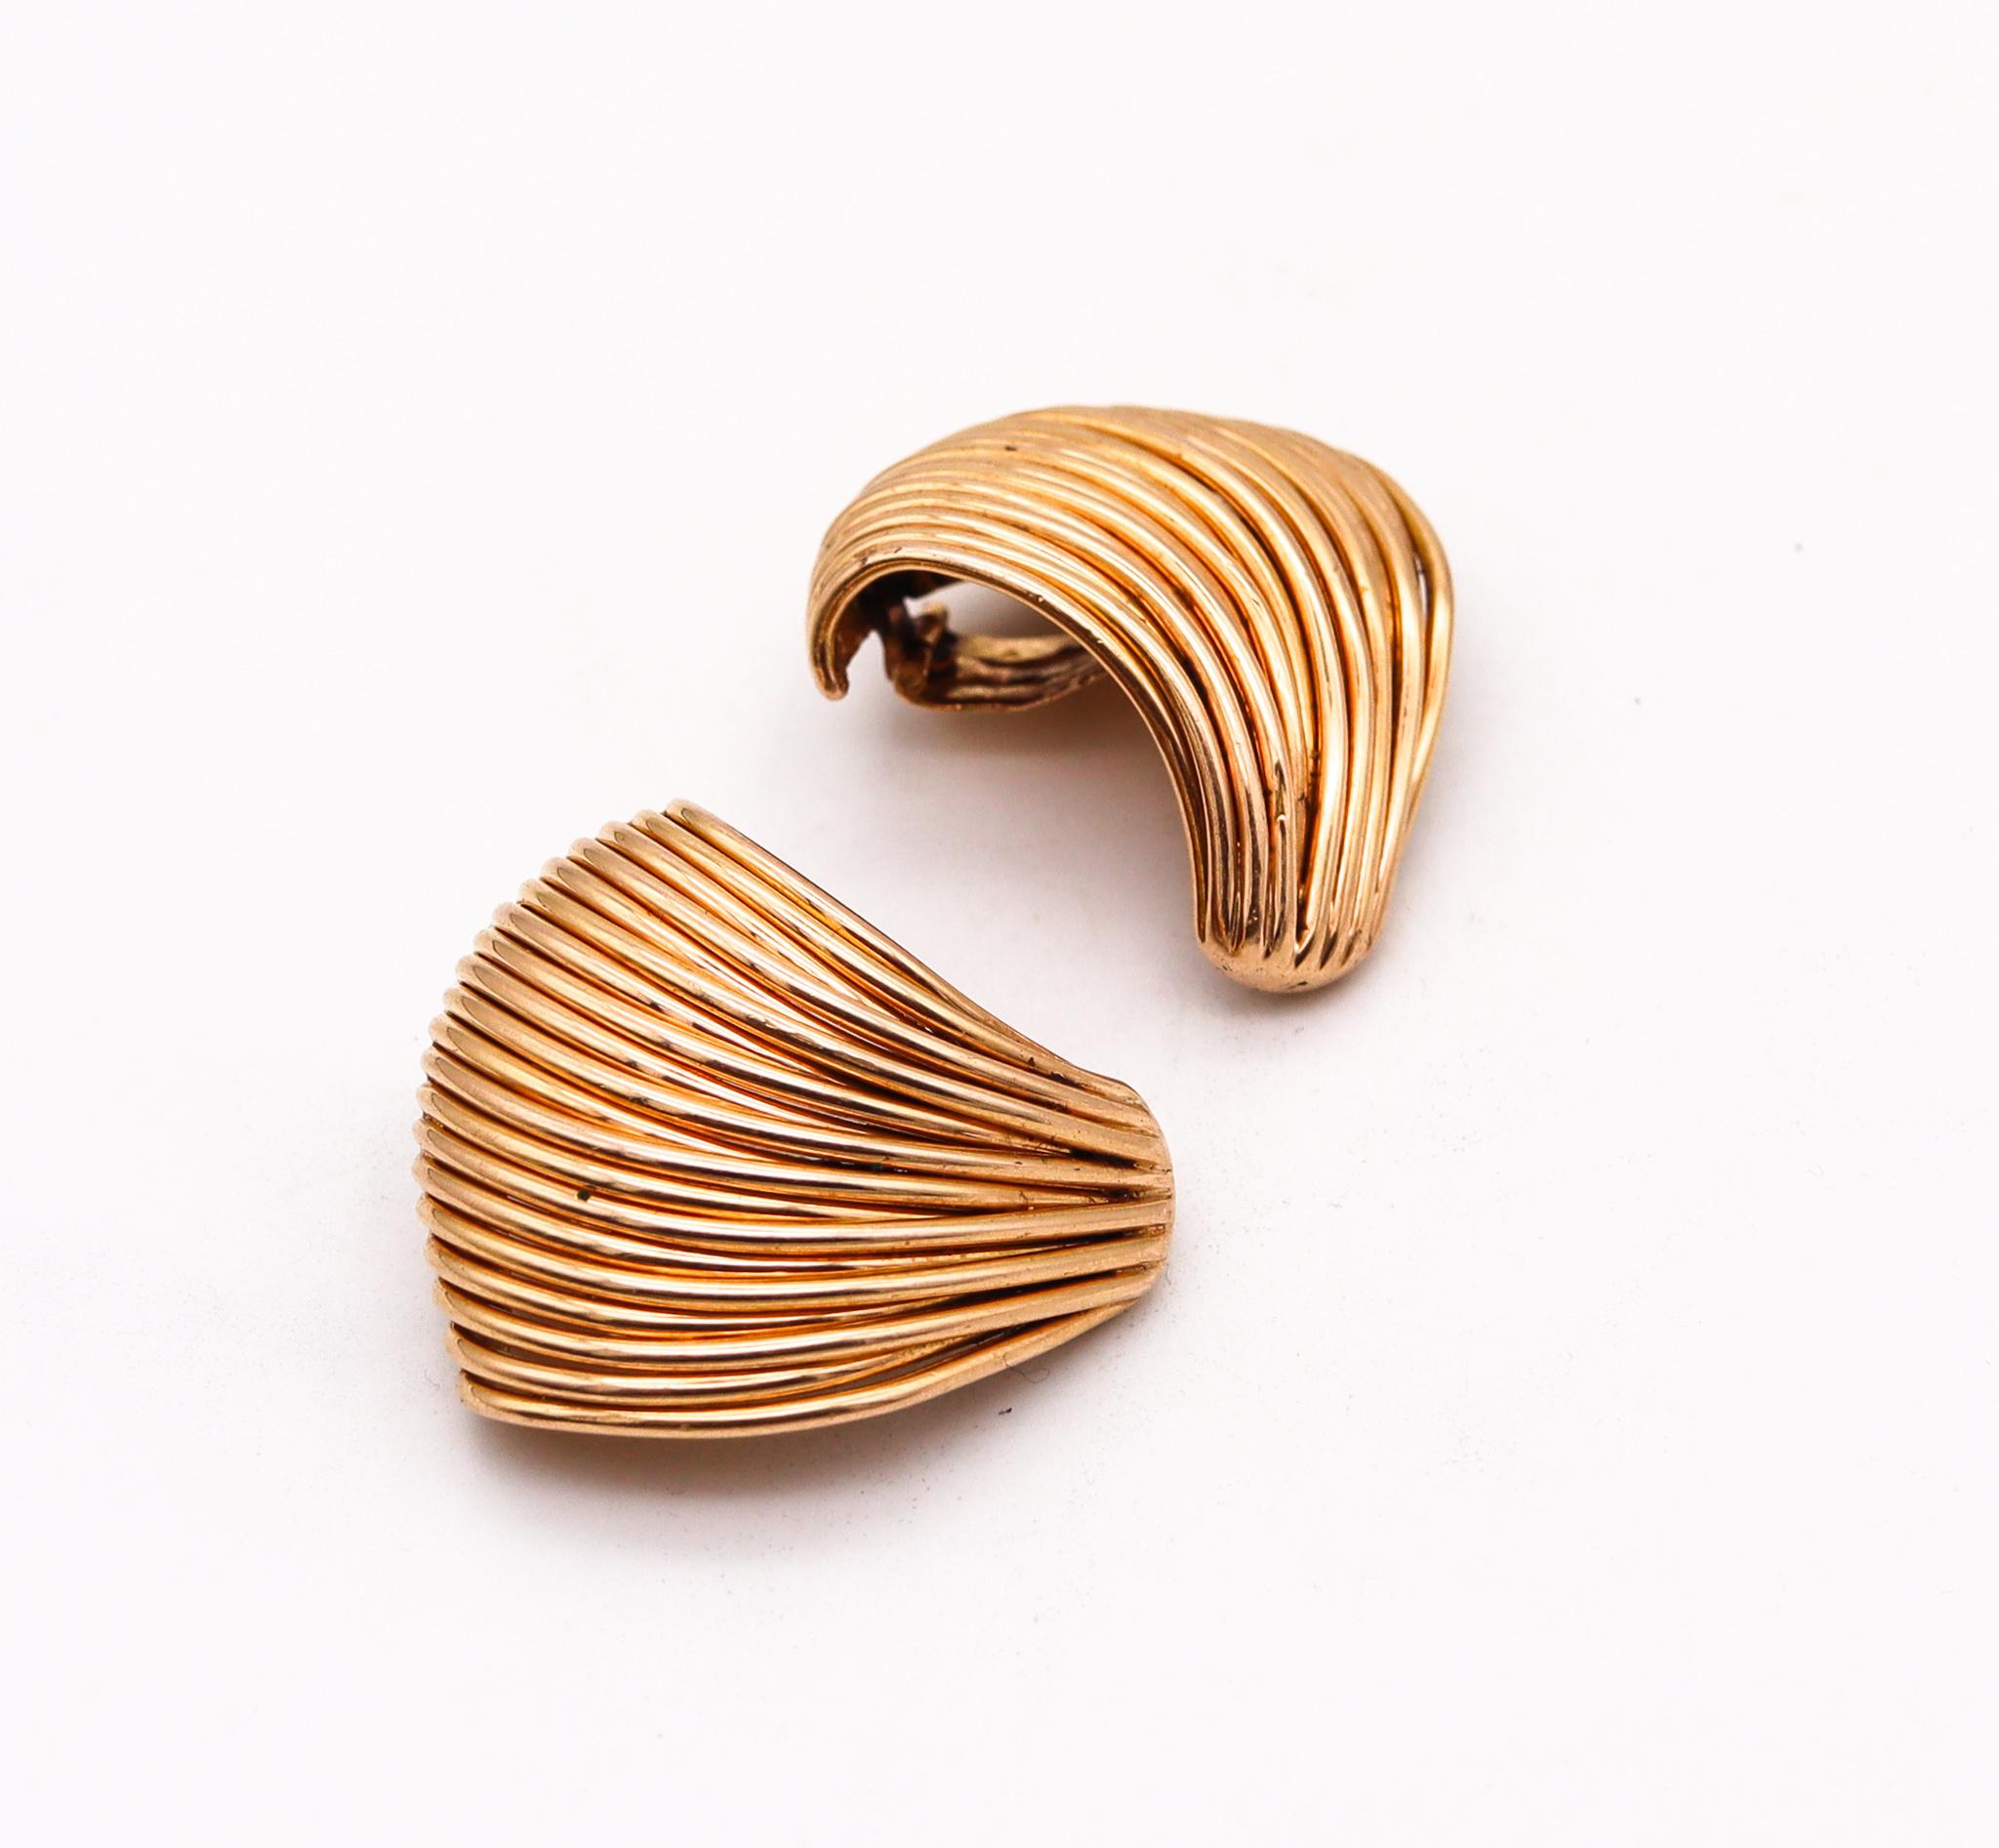 Art Deco 1940 Retro Sculptural Wired Clips Earrings in Solid 18kt Yellow Gold In Excellent Condition For Sale In Miami, FL